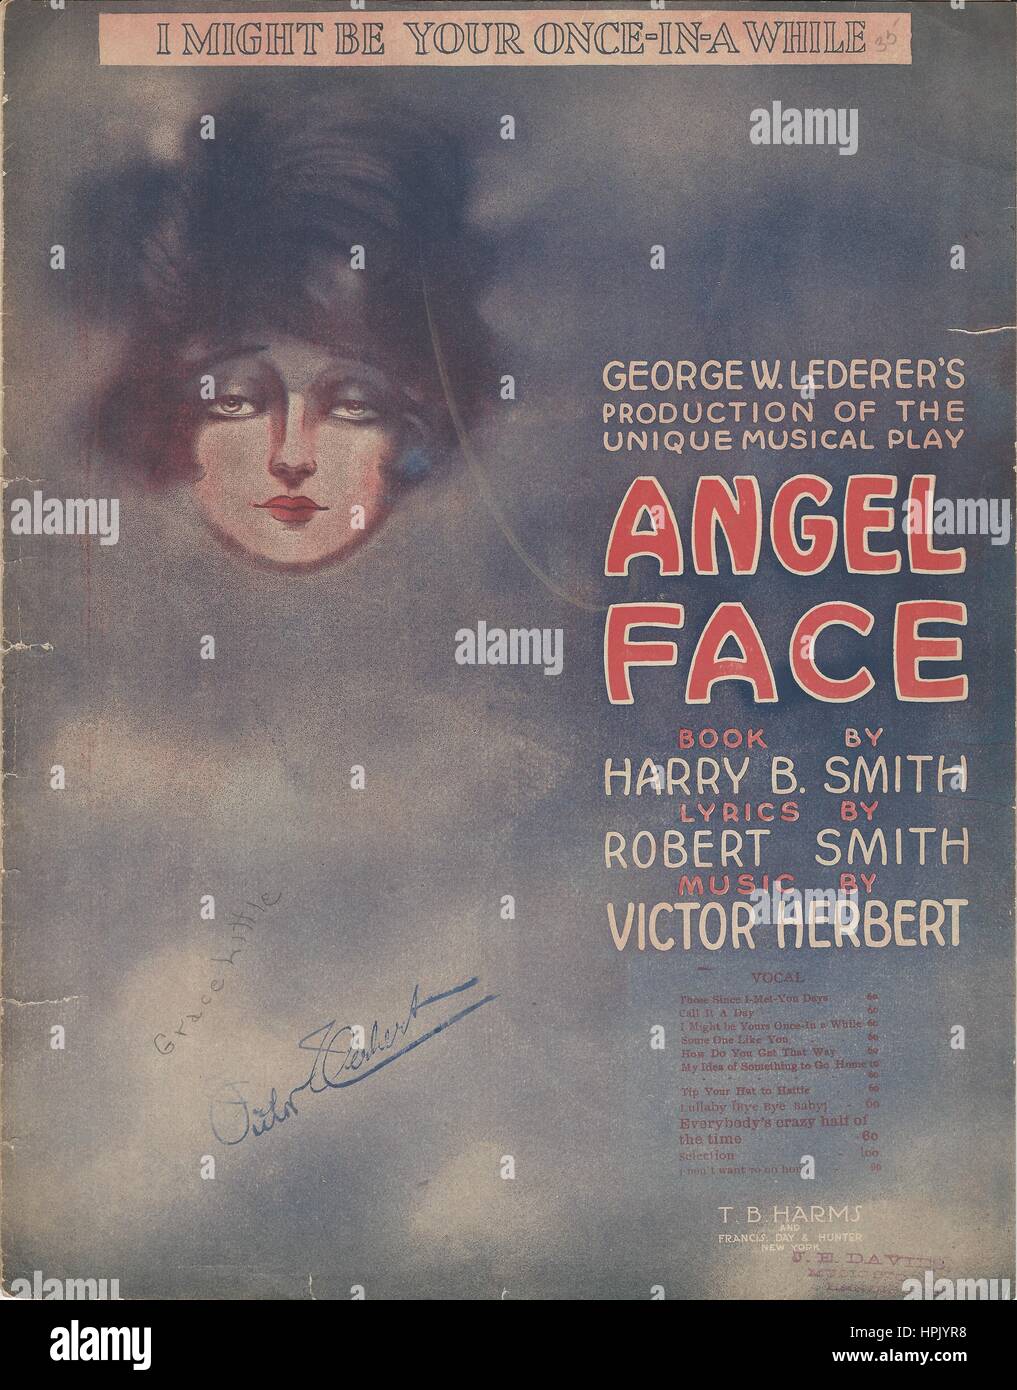 'Angel Face' 1919 Musical Sheet Music Cover Stock Photo